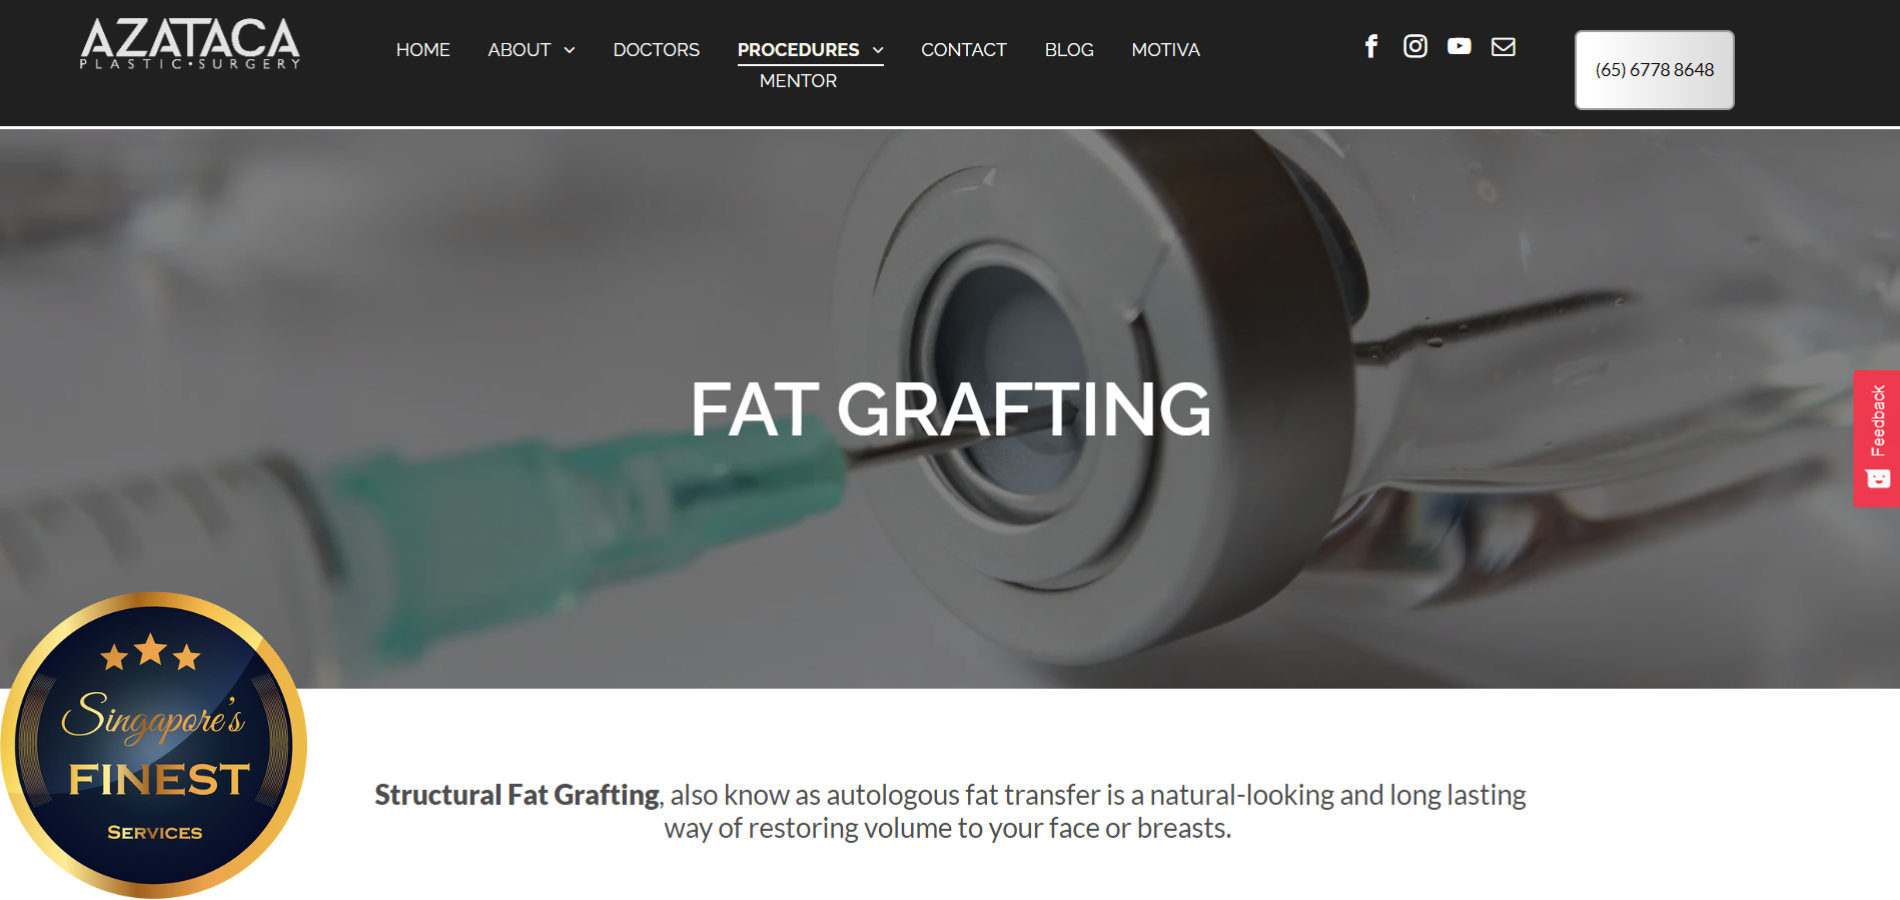 The Finest Fat Grafting Clinics in Singapore